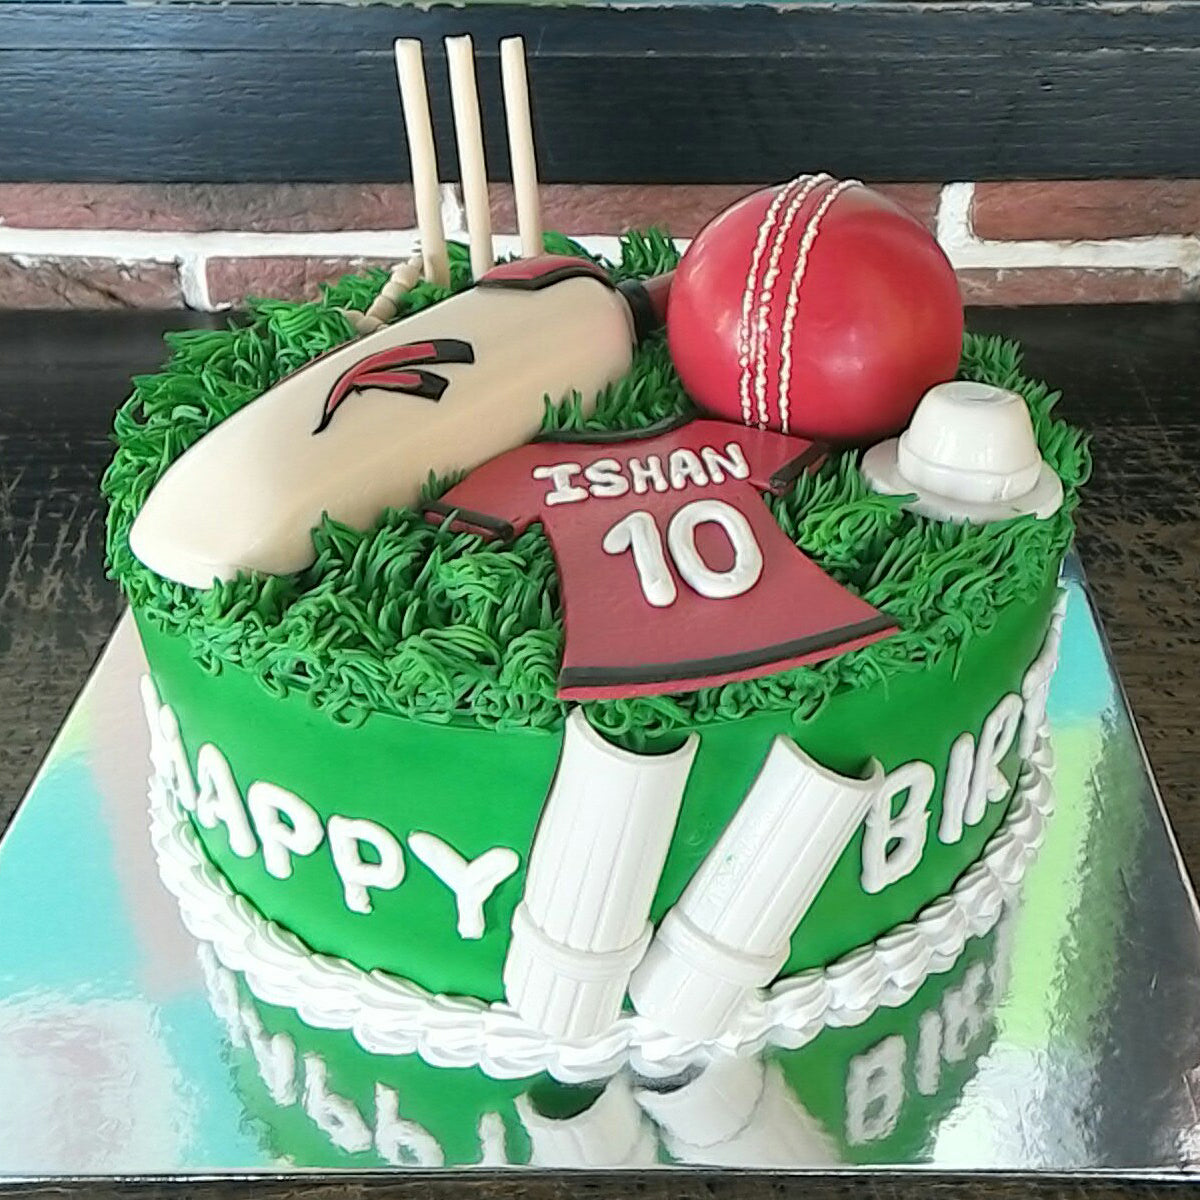 Cricket Bat And Ball Made From Rkt Covered In Ganache Then Fondant Cake Is  Vanilla Filled With Alternating Layers Of Lemon Curd And Vanilla -  CakeCentral.com